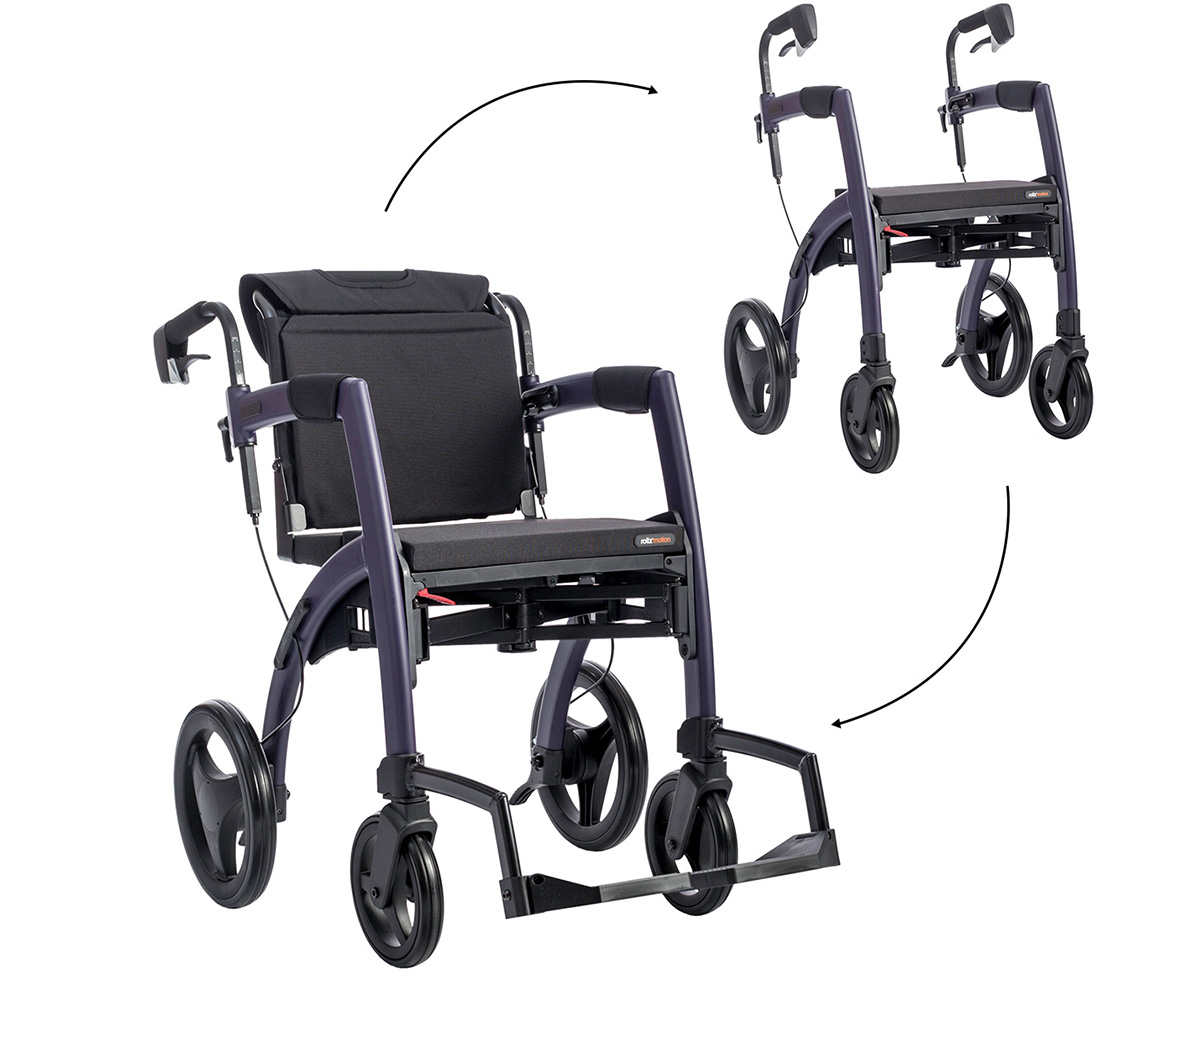 Goplus 2 in 1 Rollator Walkers for Seniors with Seat, 8-inch Wheel Medical  Drive Walker Wheelchair Combo with Backrest, Height-Adjustable Handle